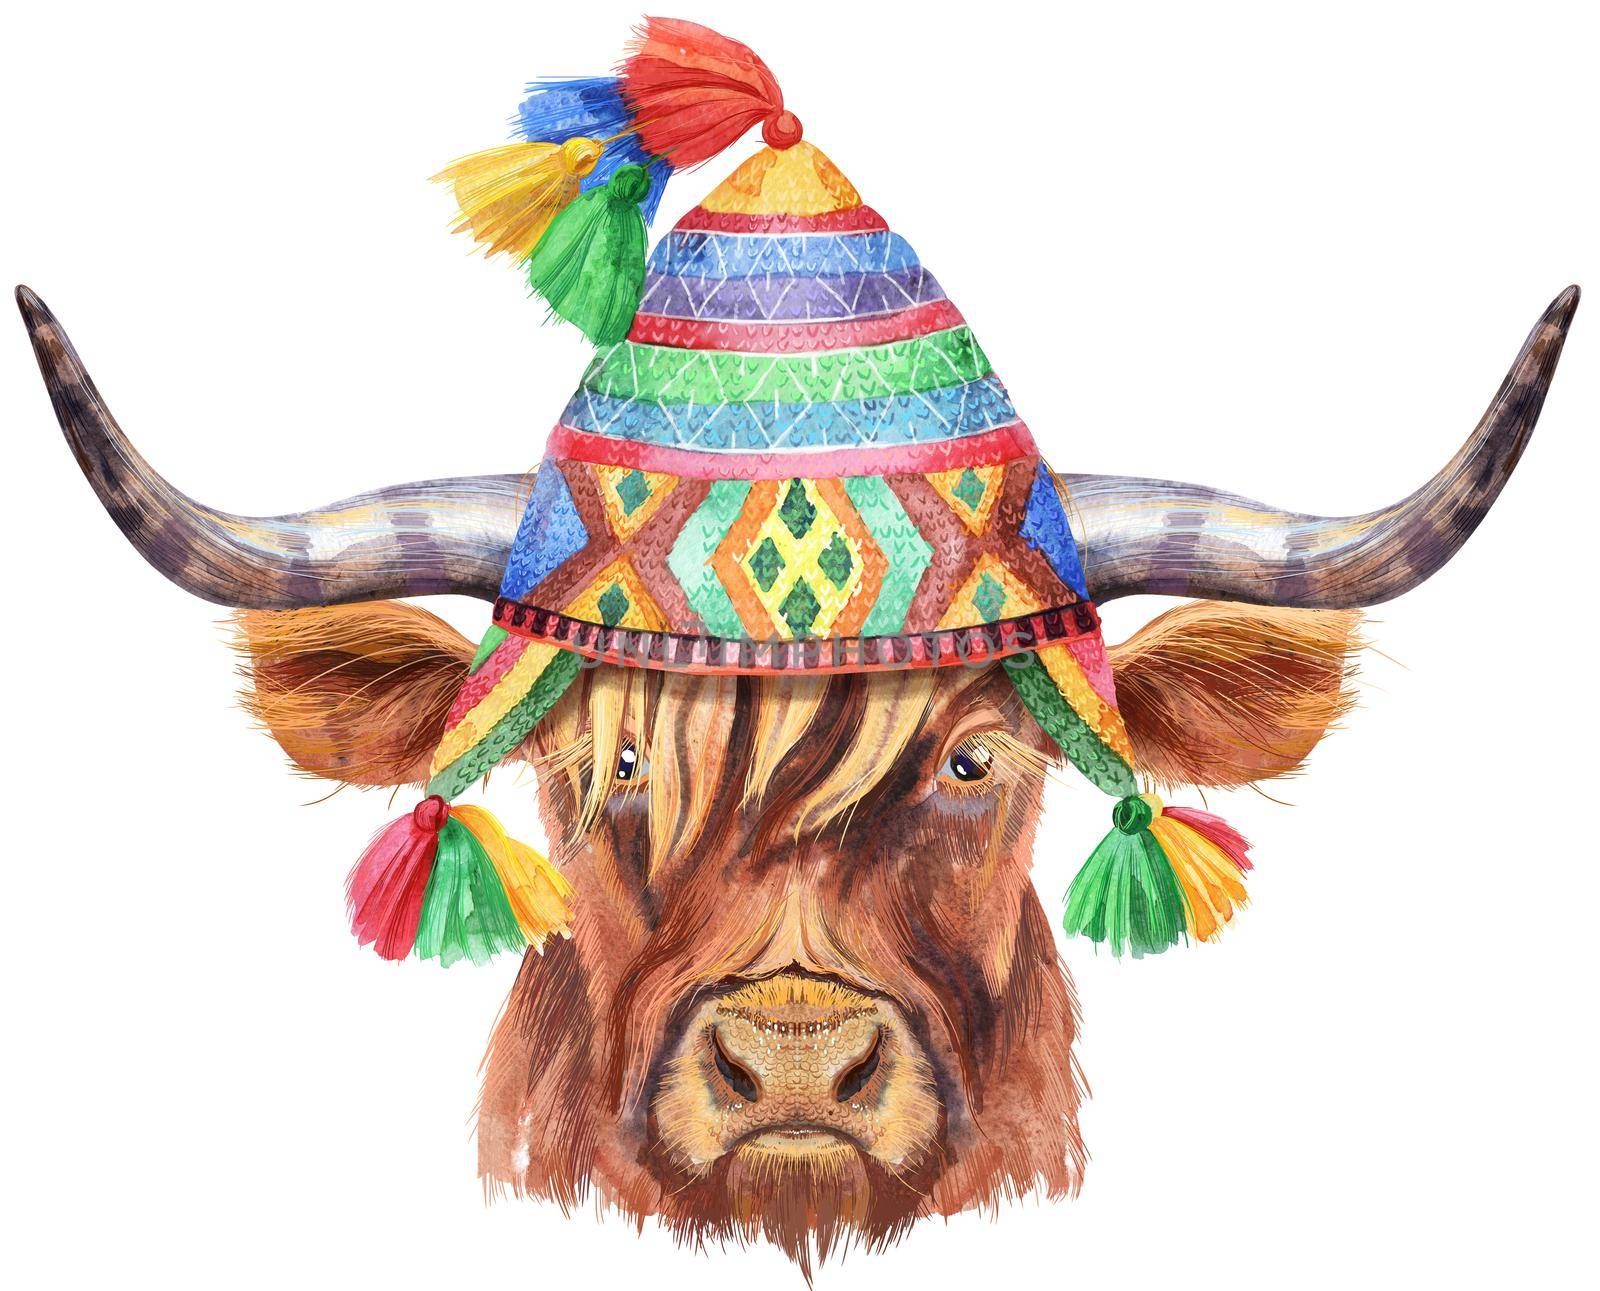 Bull in chullo hat watercolor graphics. Bull animal illustration with splash watercolor textured background.